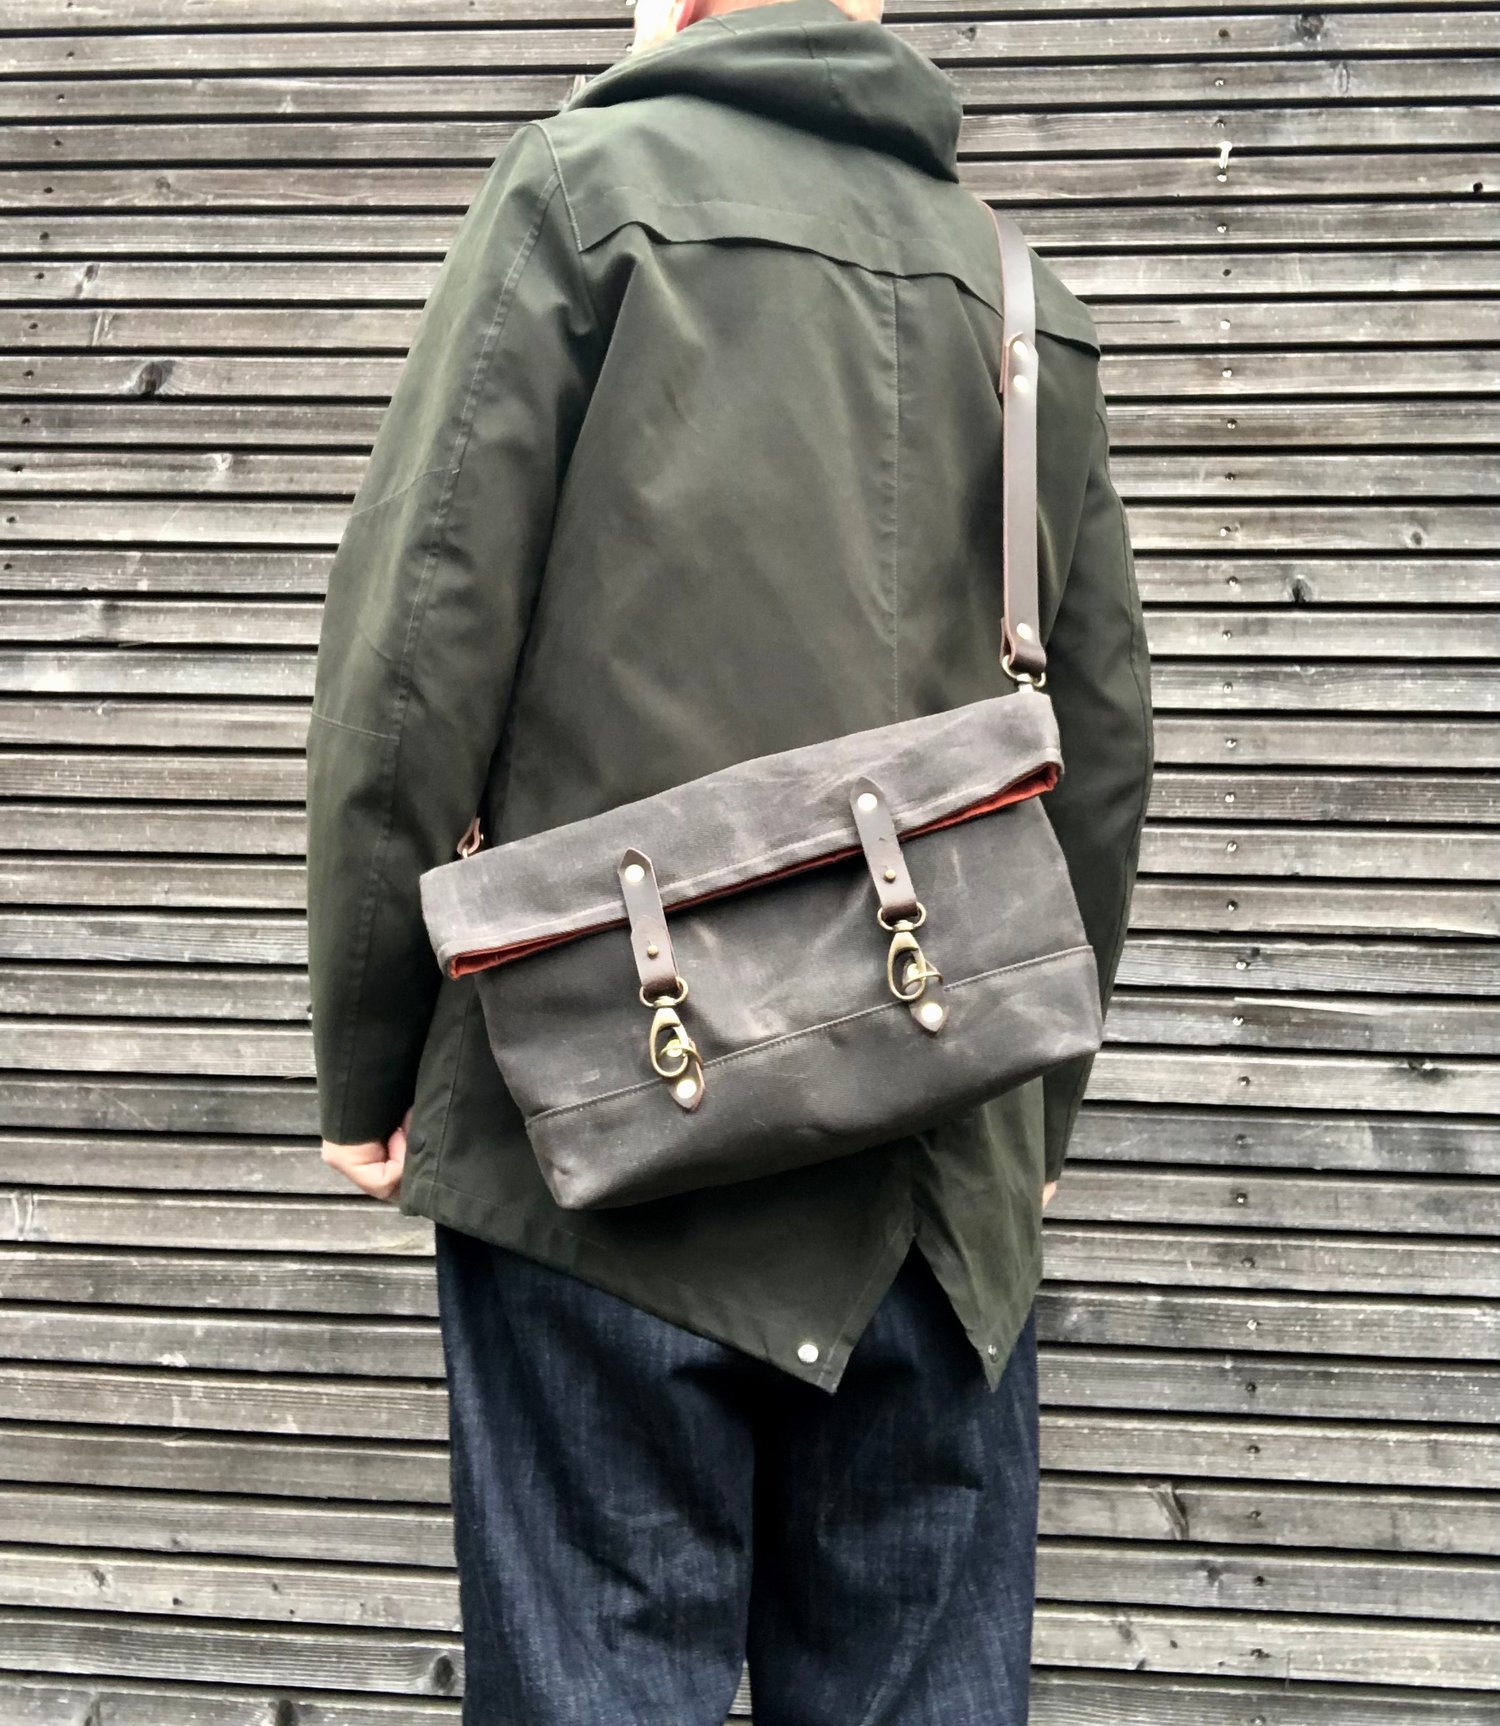 Image of Field bag made in waxed canvas and leather satchel / messenger bag / canvas day bag